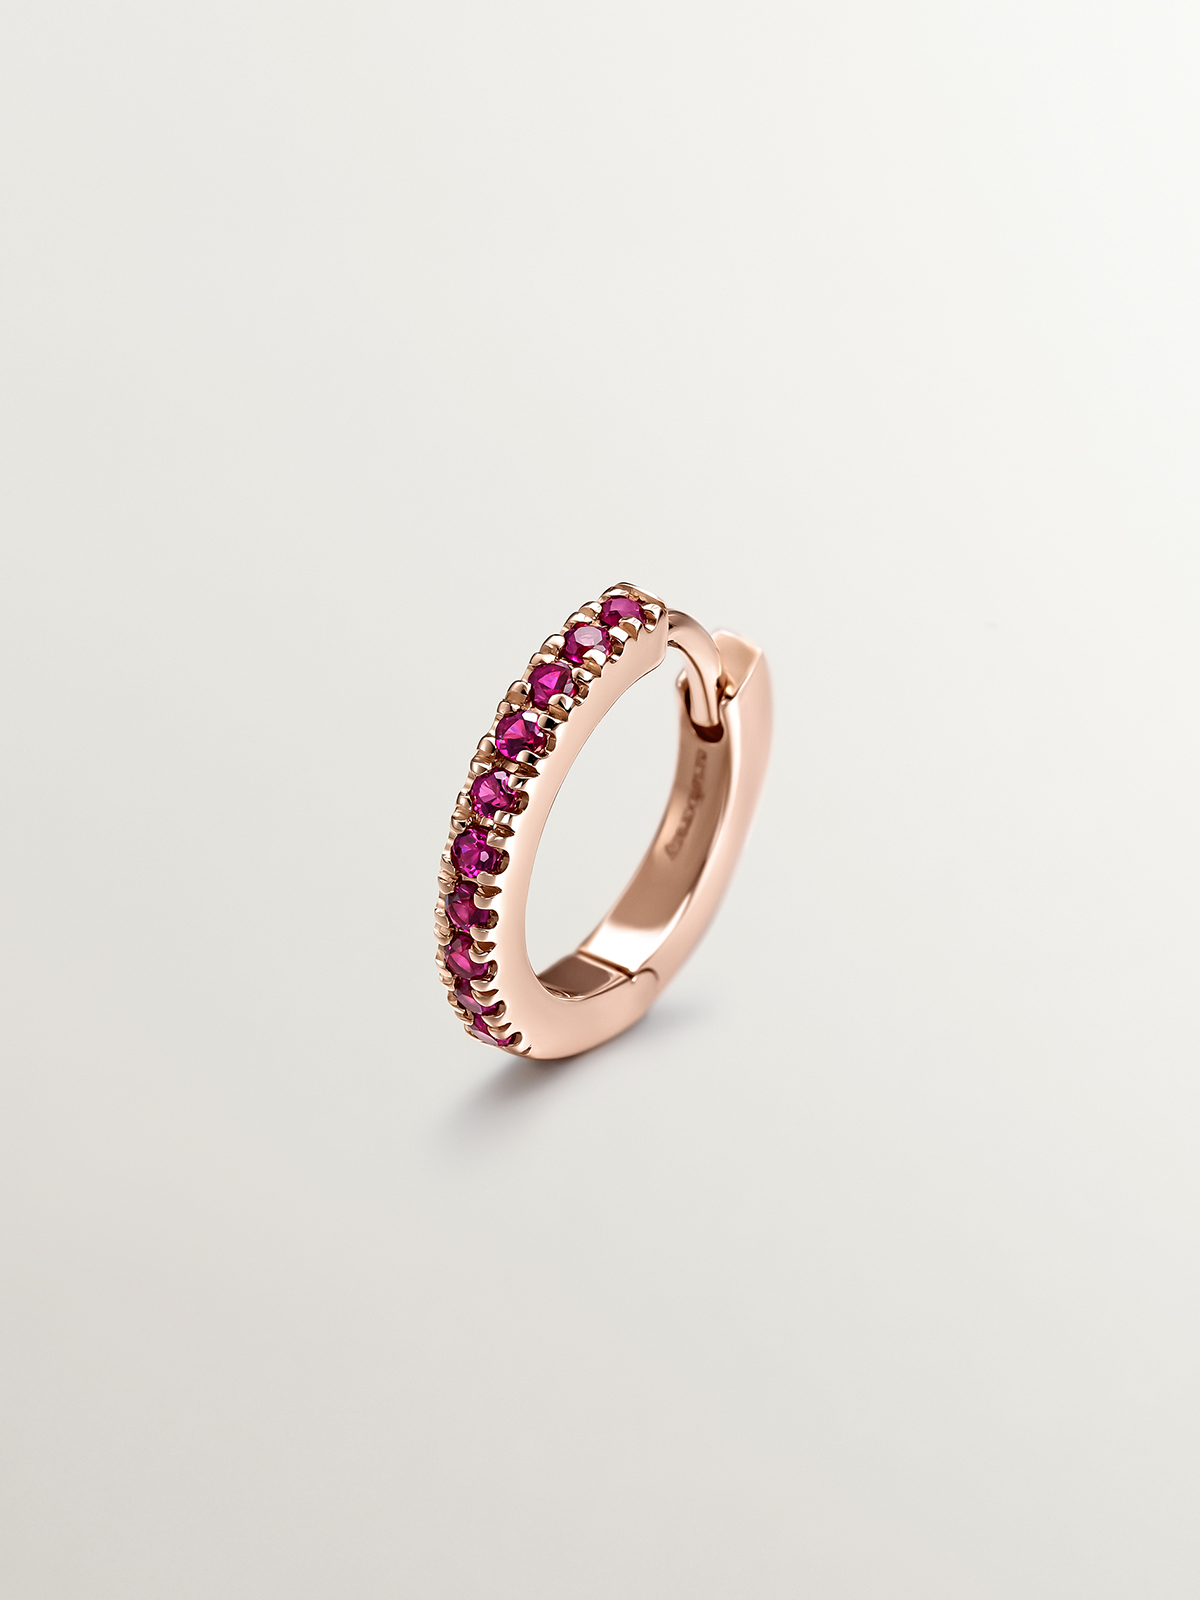 Single small hoop earring in 9k rose gold with pink rubies.